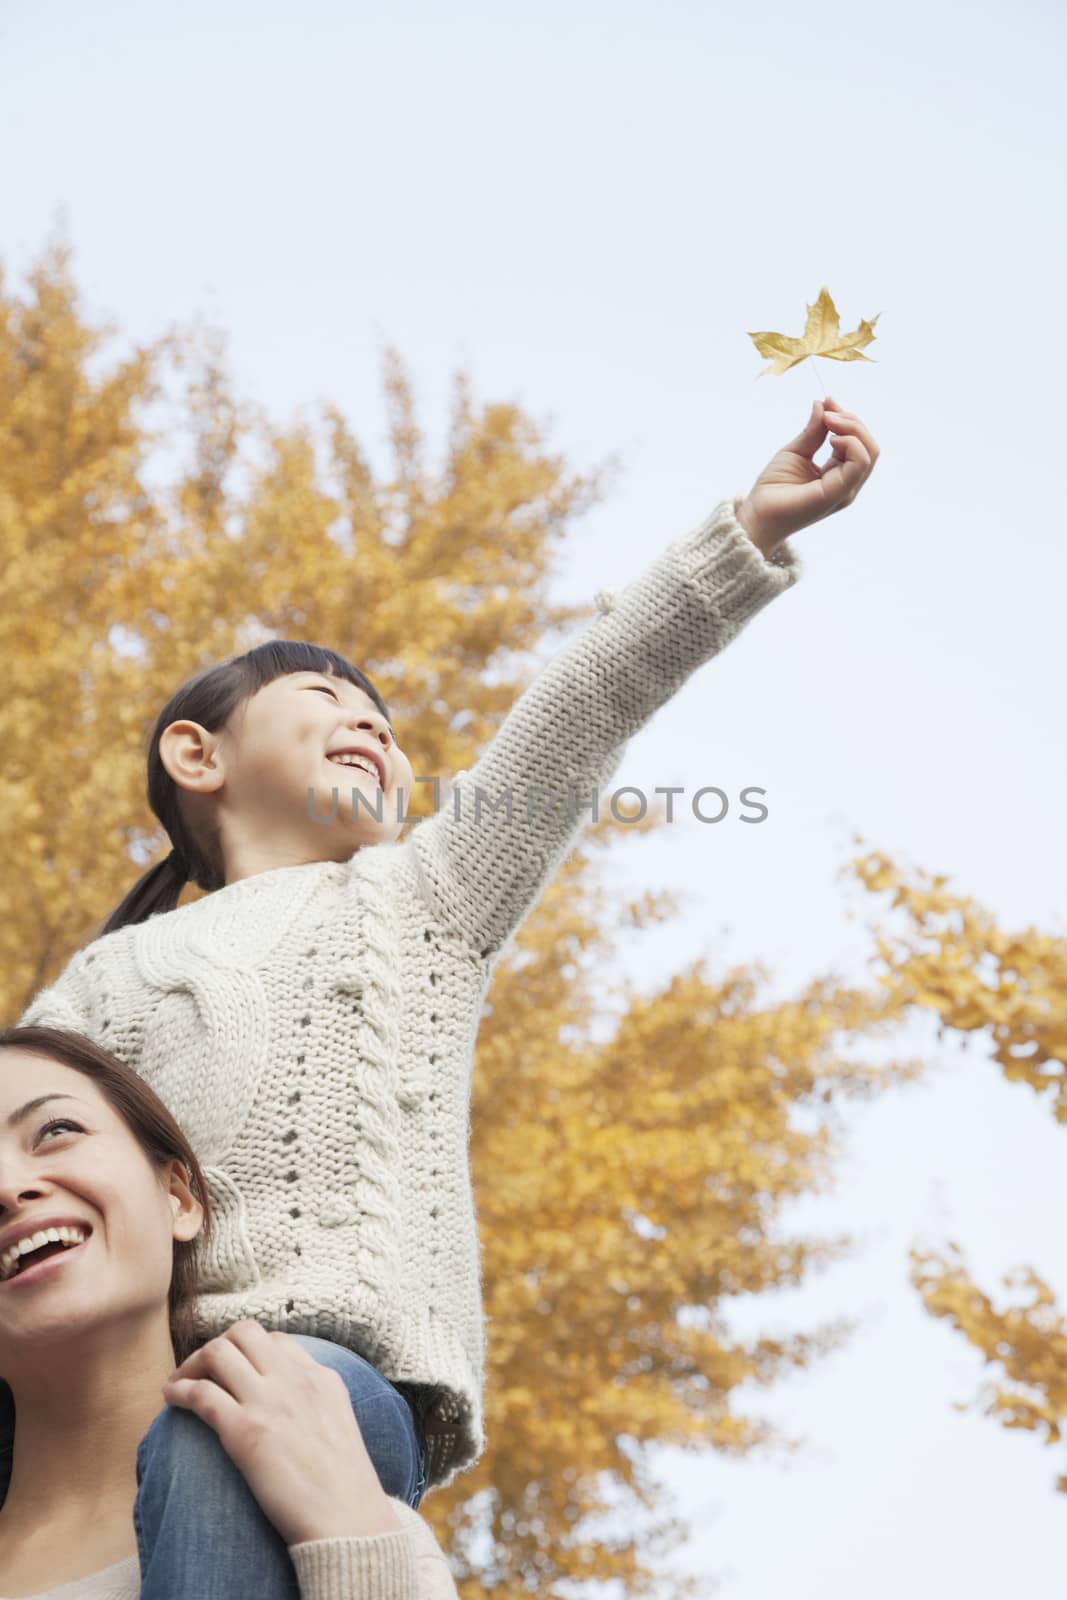 Daughter Riding Piggy-Back on Mother's Shoulders Enjoying Autumn Leaves